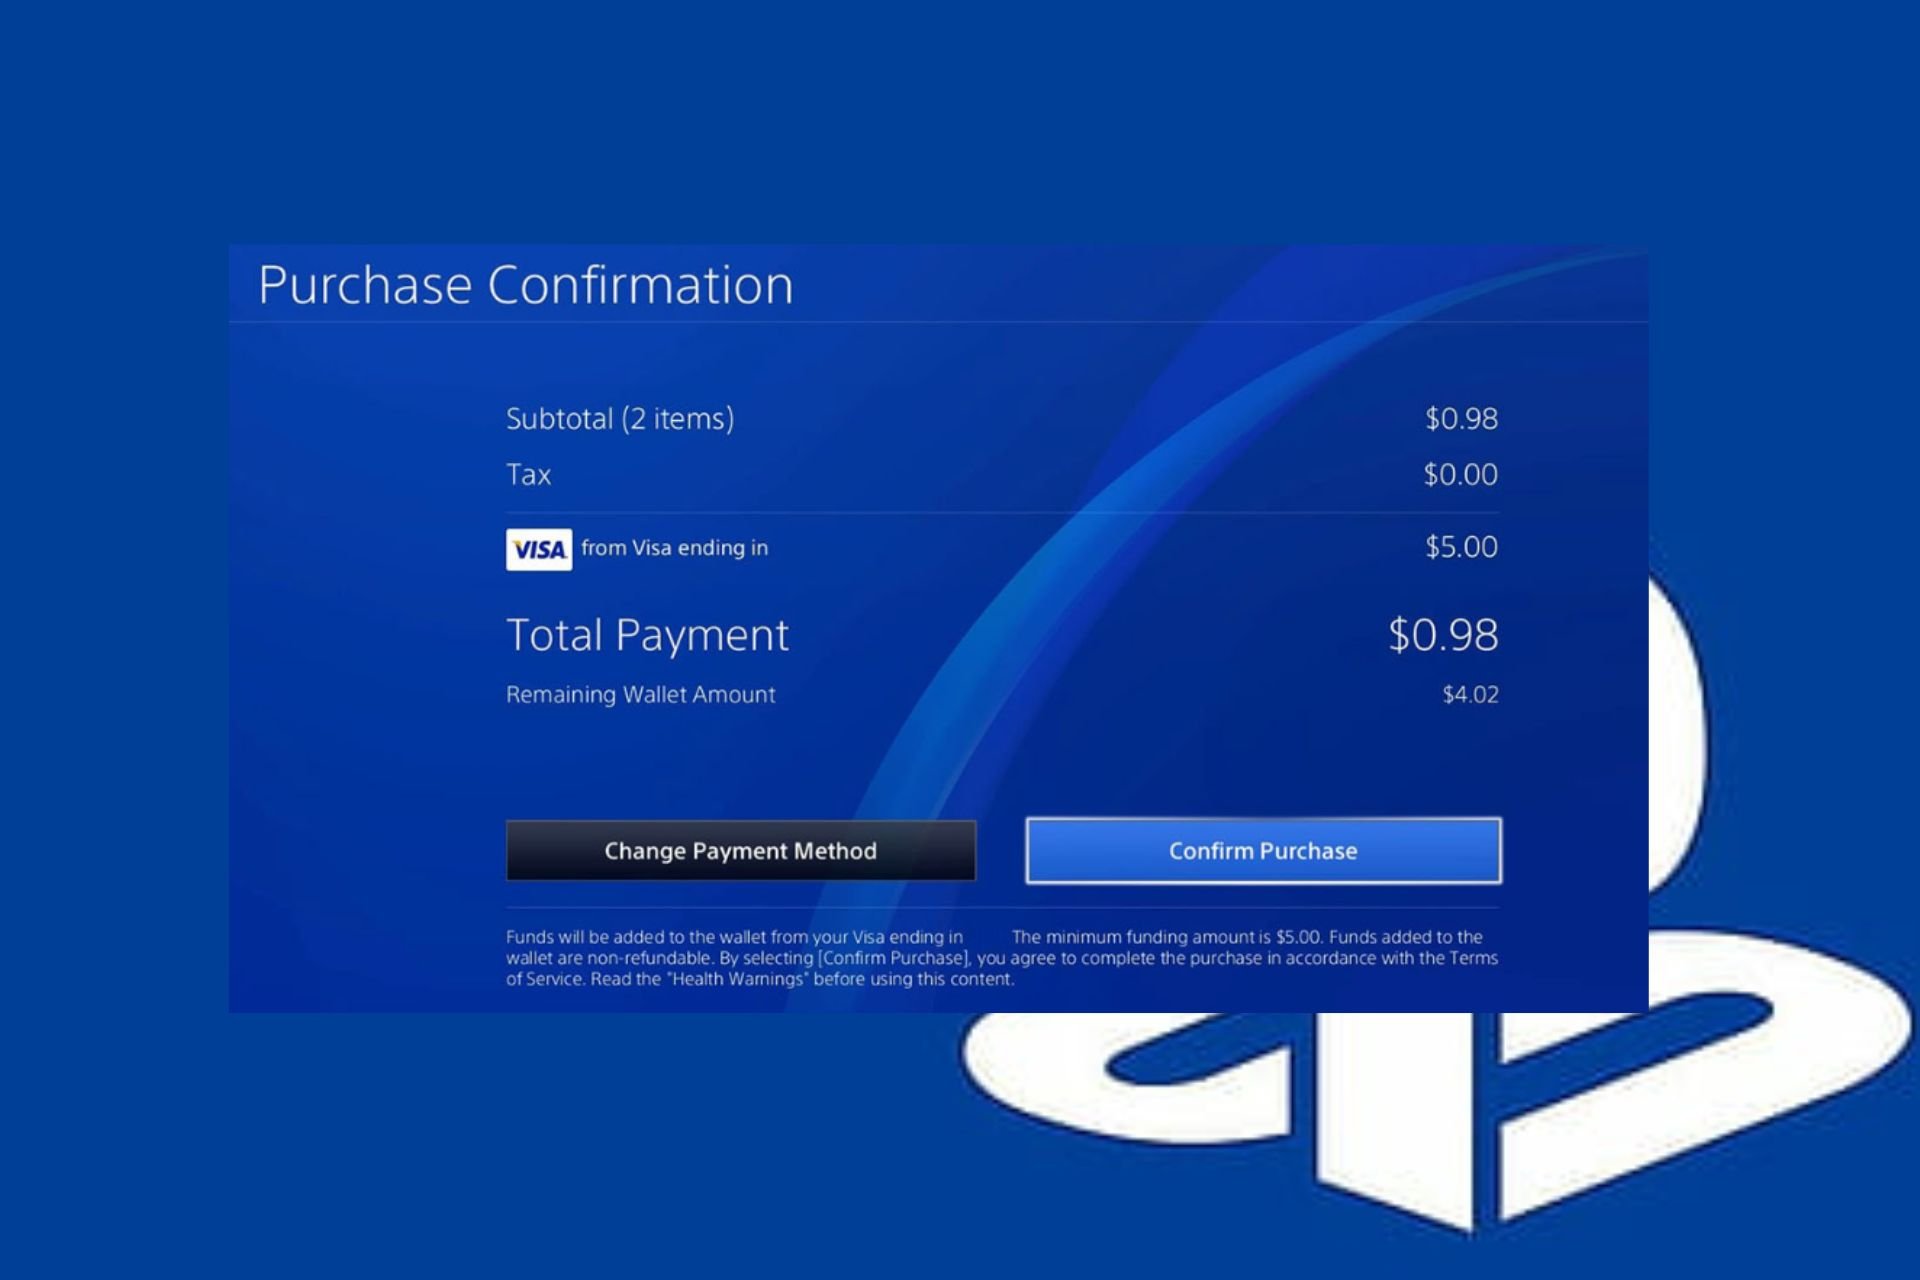 How to Add Funds to PS4 or PS5 Wallet? Here Are Two Methods